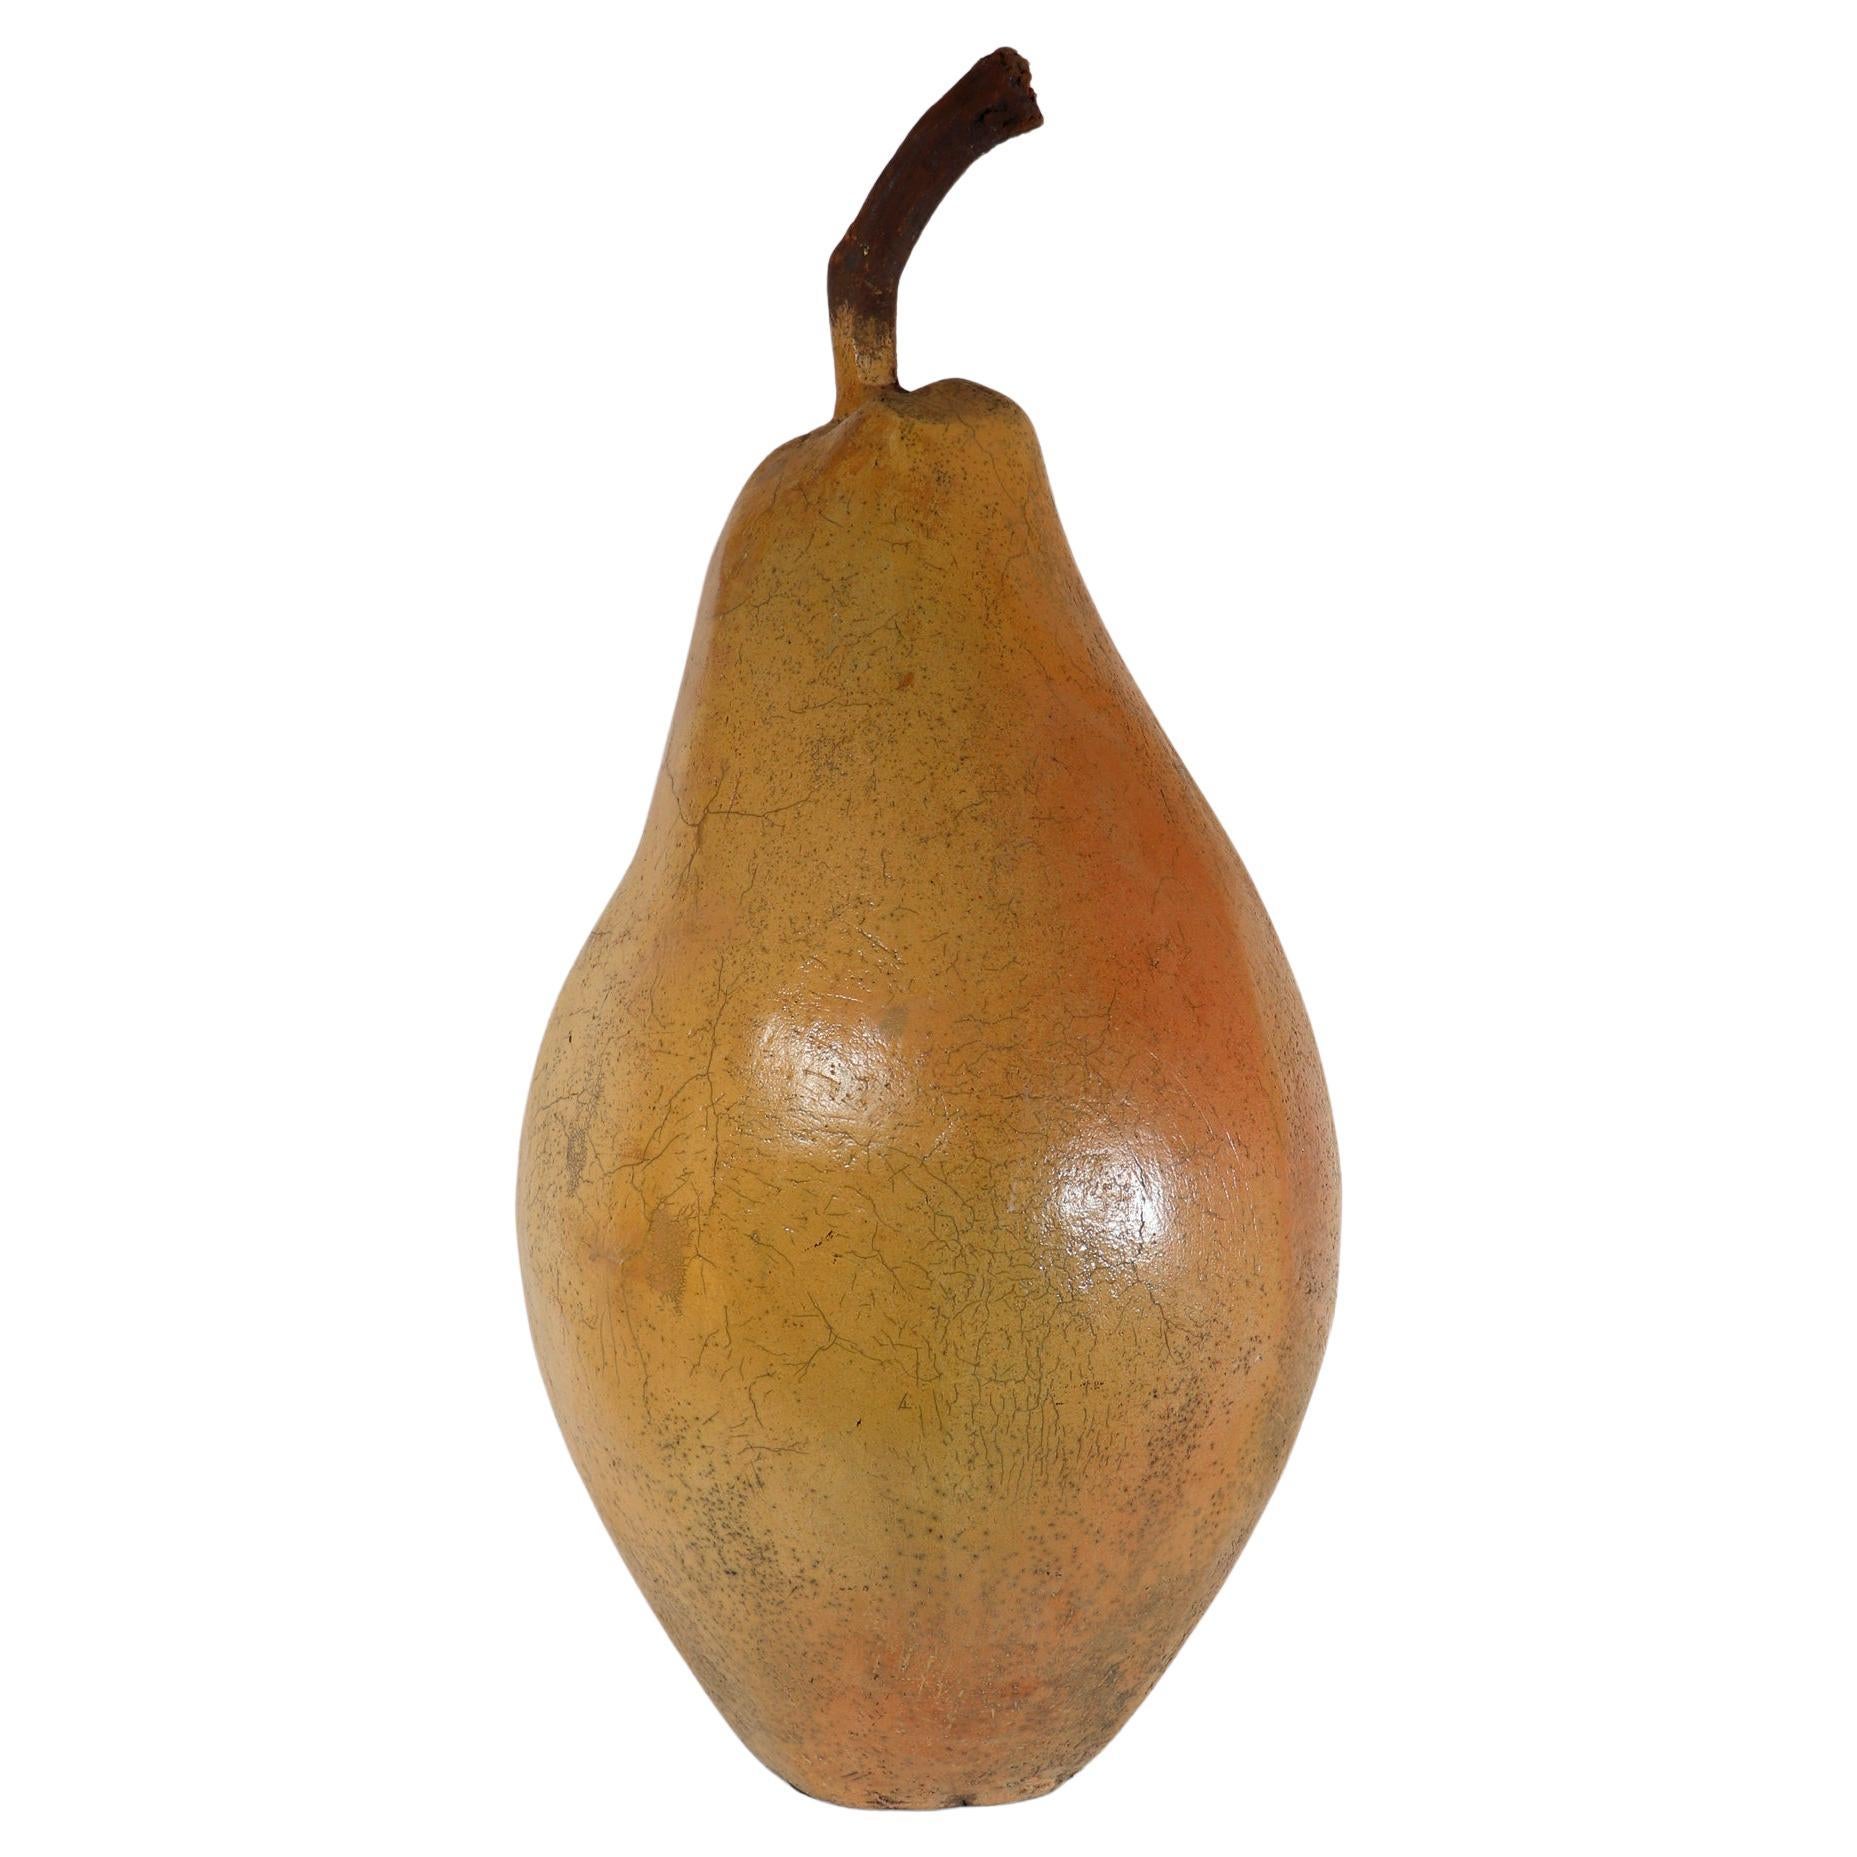 Oversized Raku Pottery Sculpture of a Pear by Renzo Faggioll For Sale